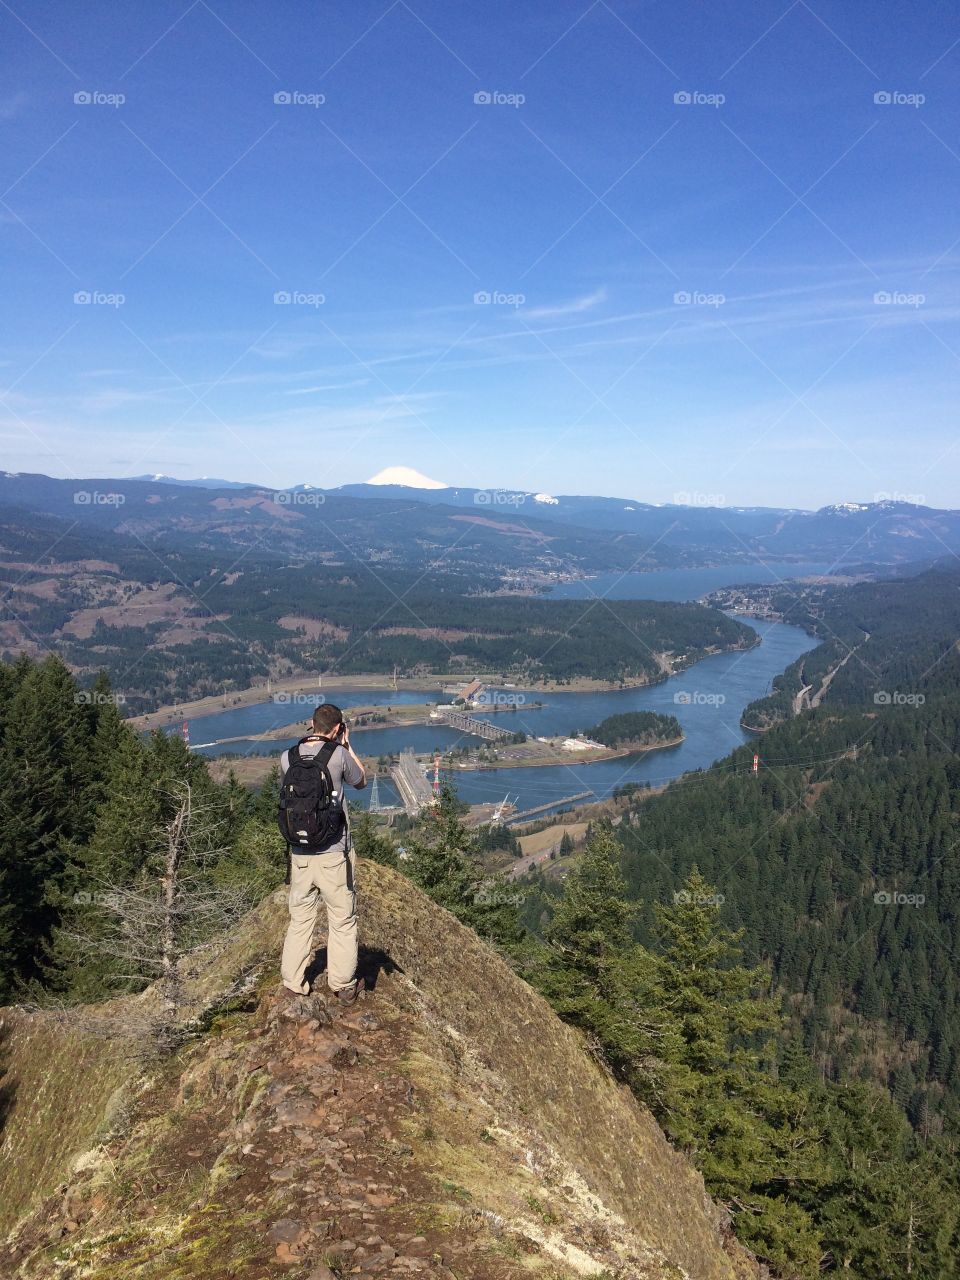 Capturing moments being captured at munra point in the Columbia River gorge.